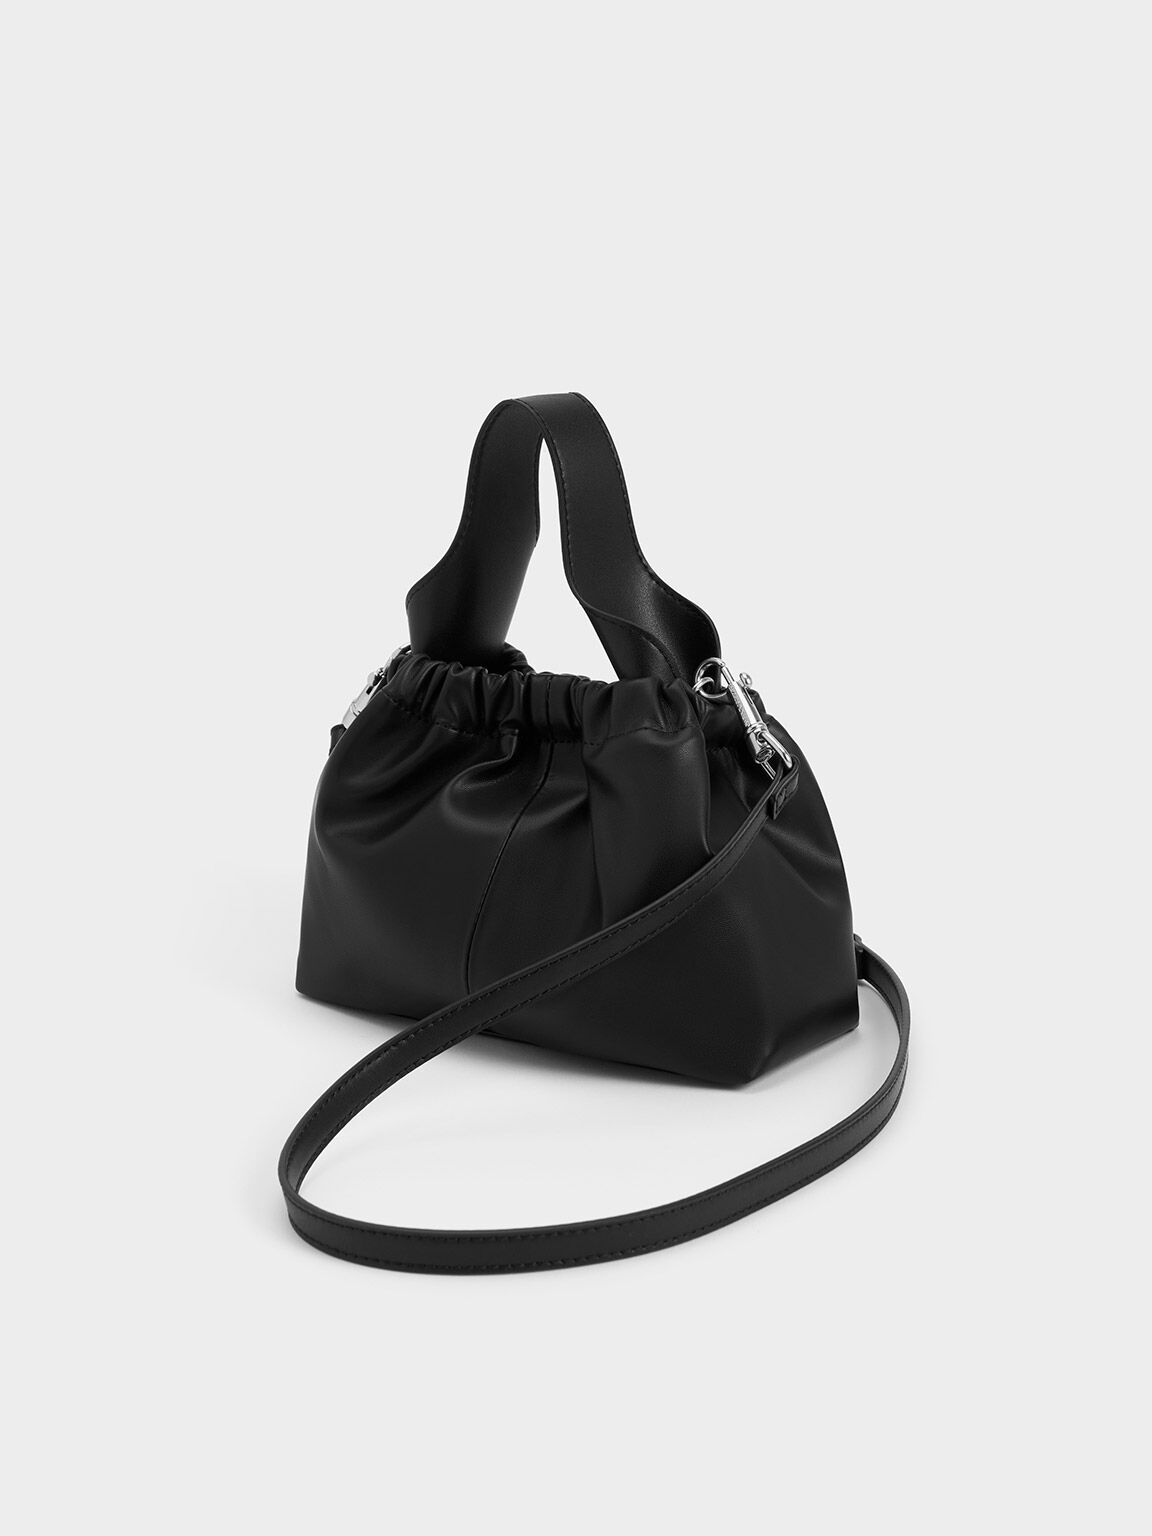 AND Handbags : Buy AND Women Black Color Hand Bag (L) Online